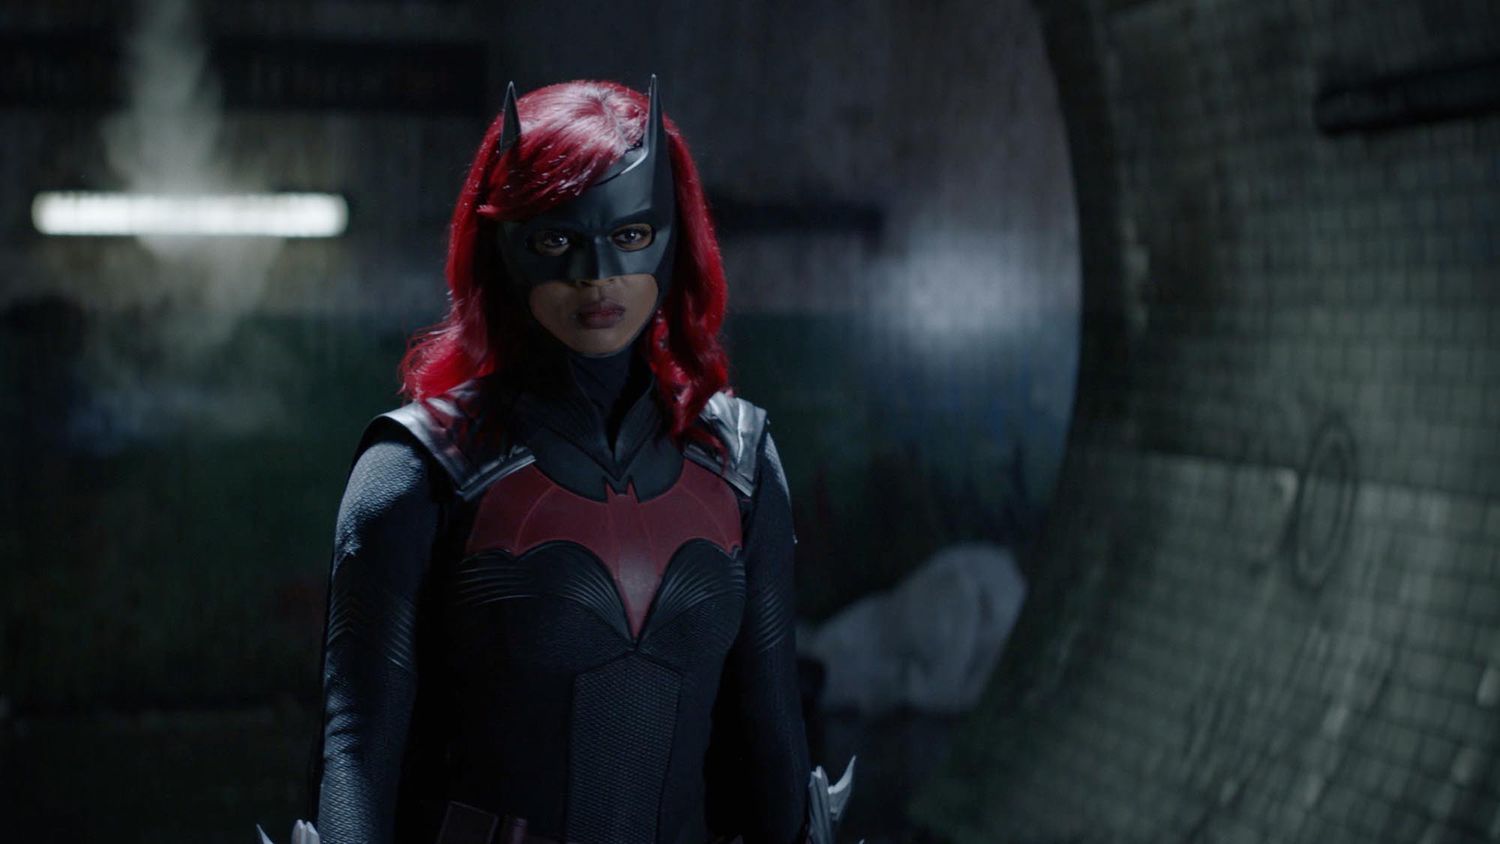 What Happened to Batwoman (Season 2, Episode 1)